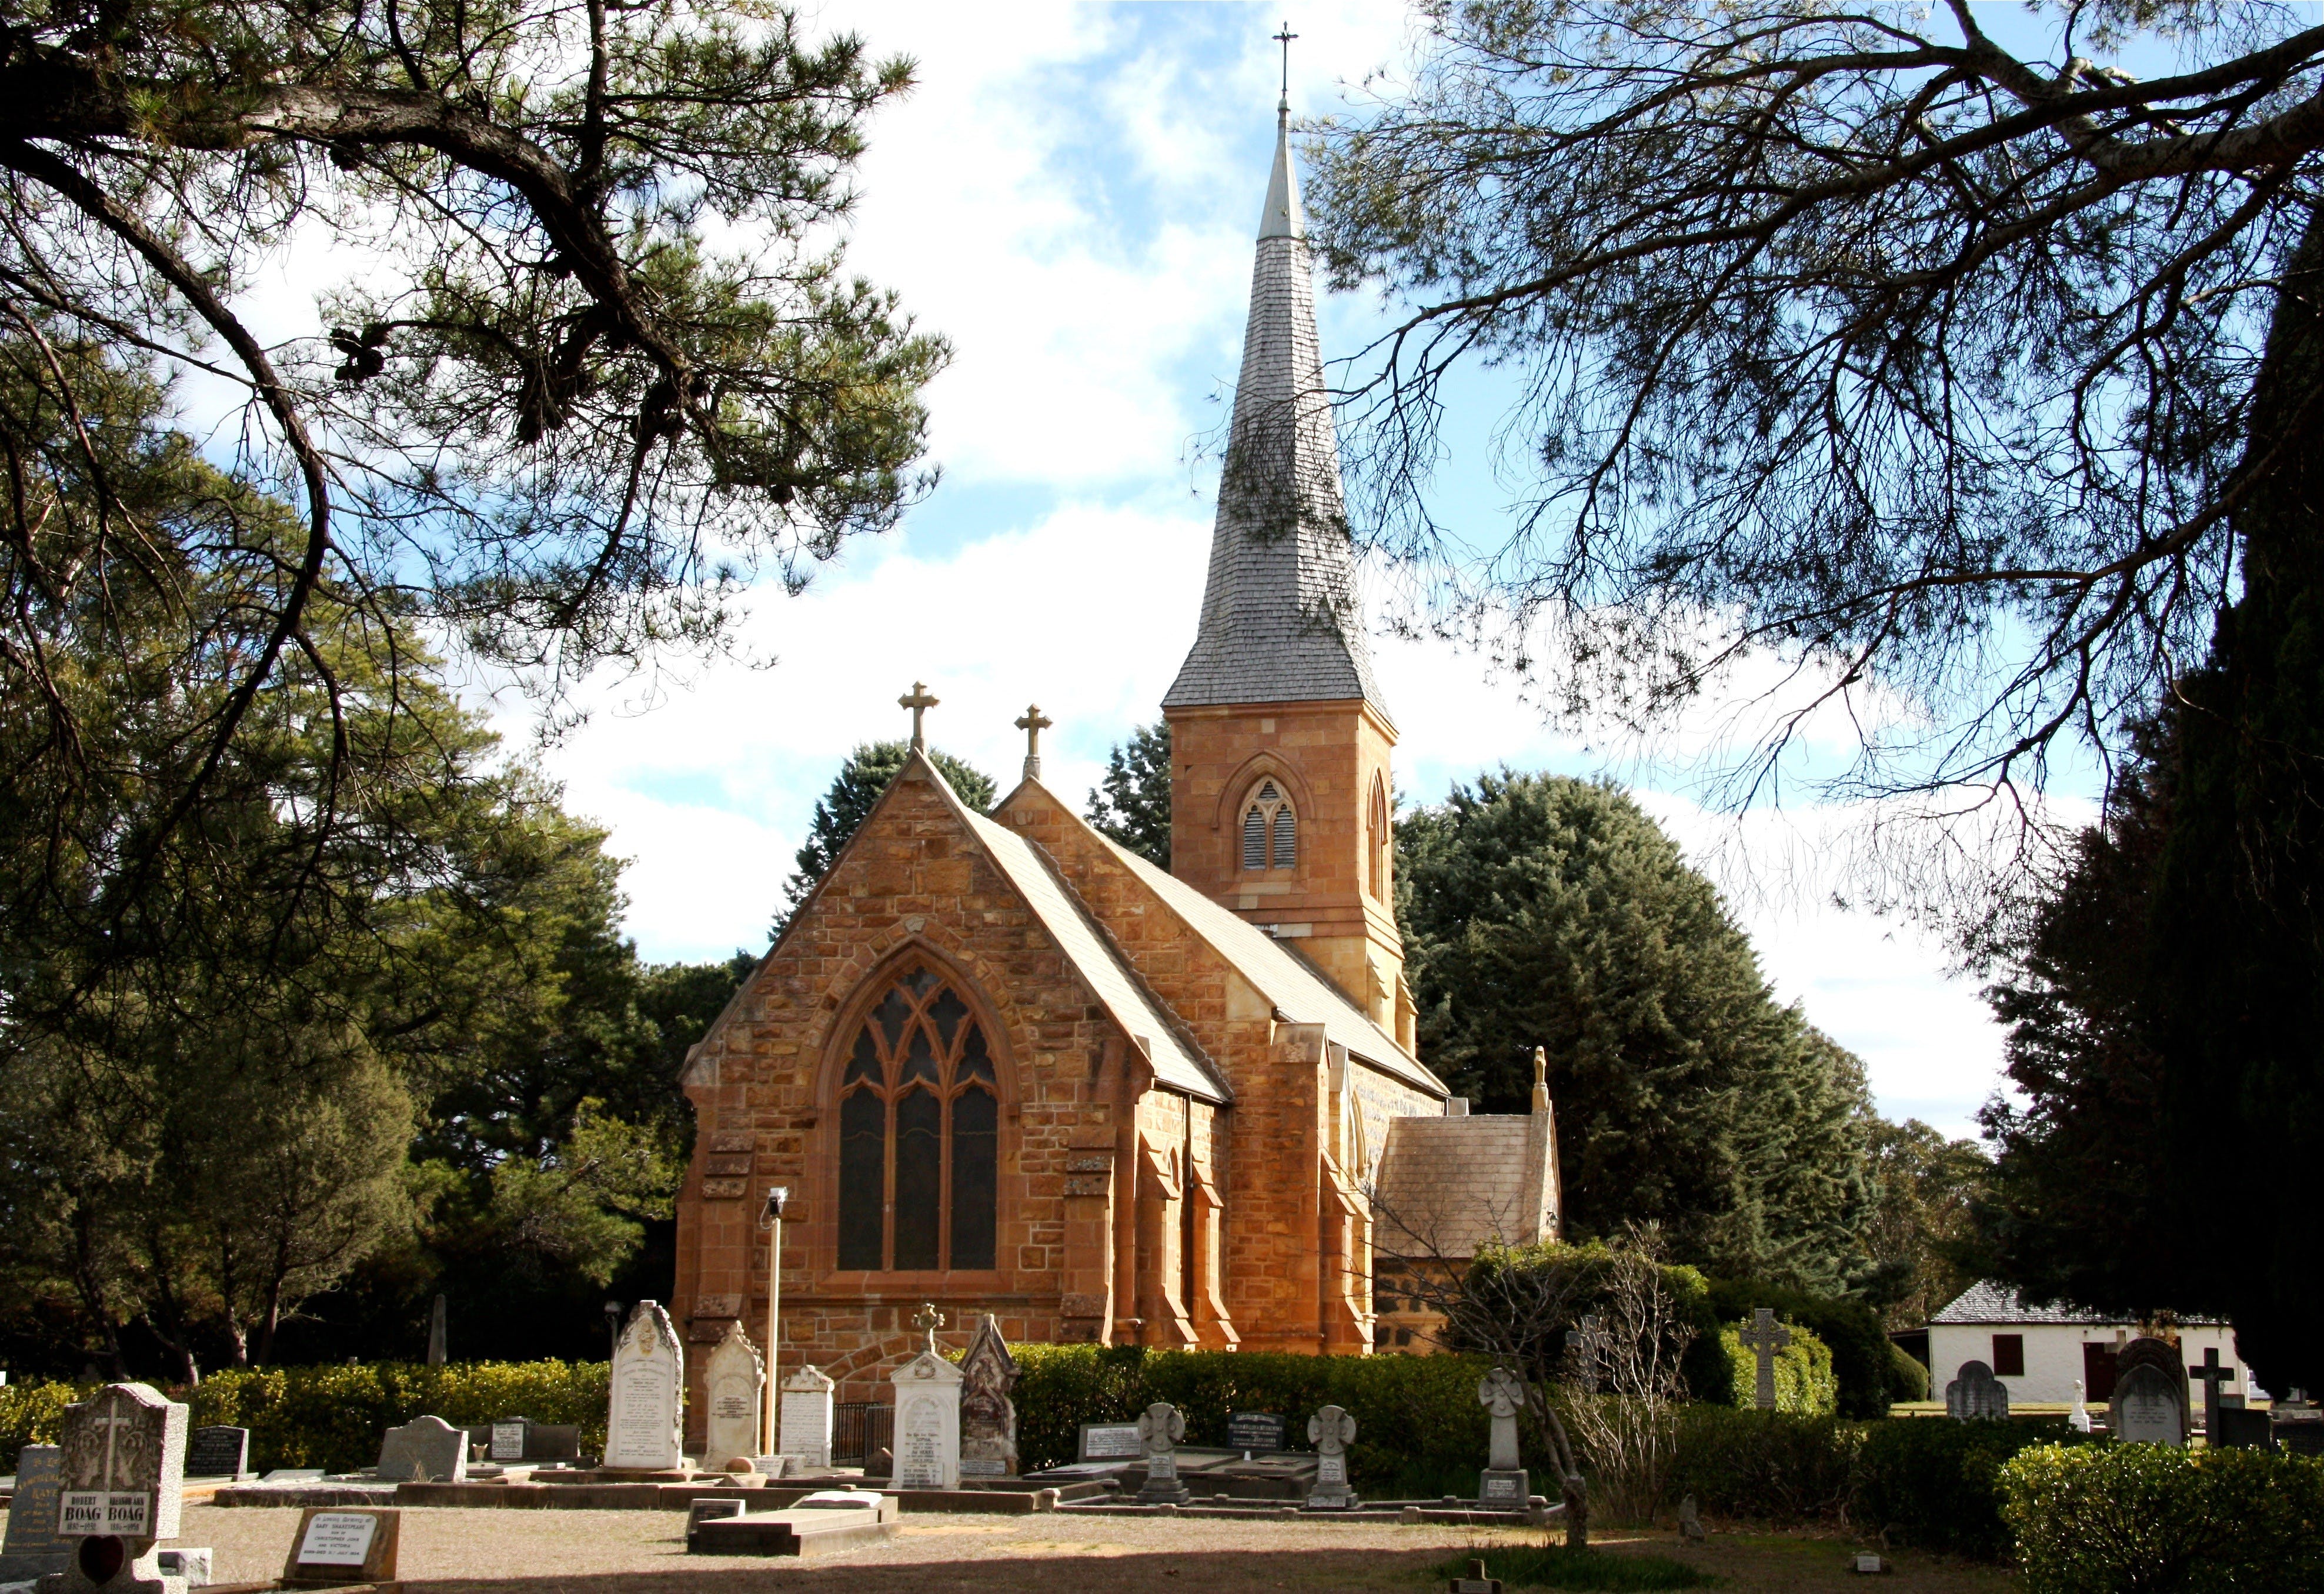 Church of St John the Baptist - Find Attractions